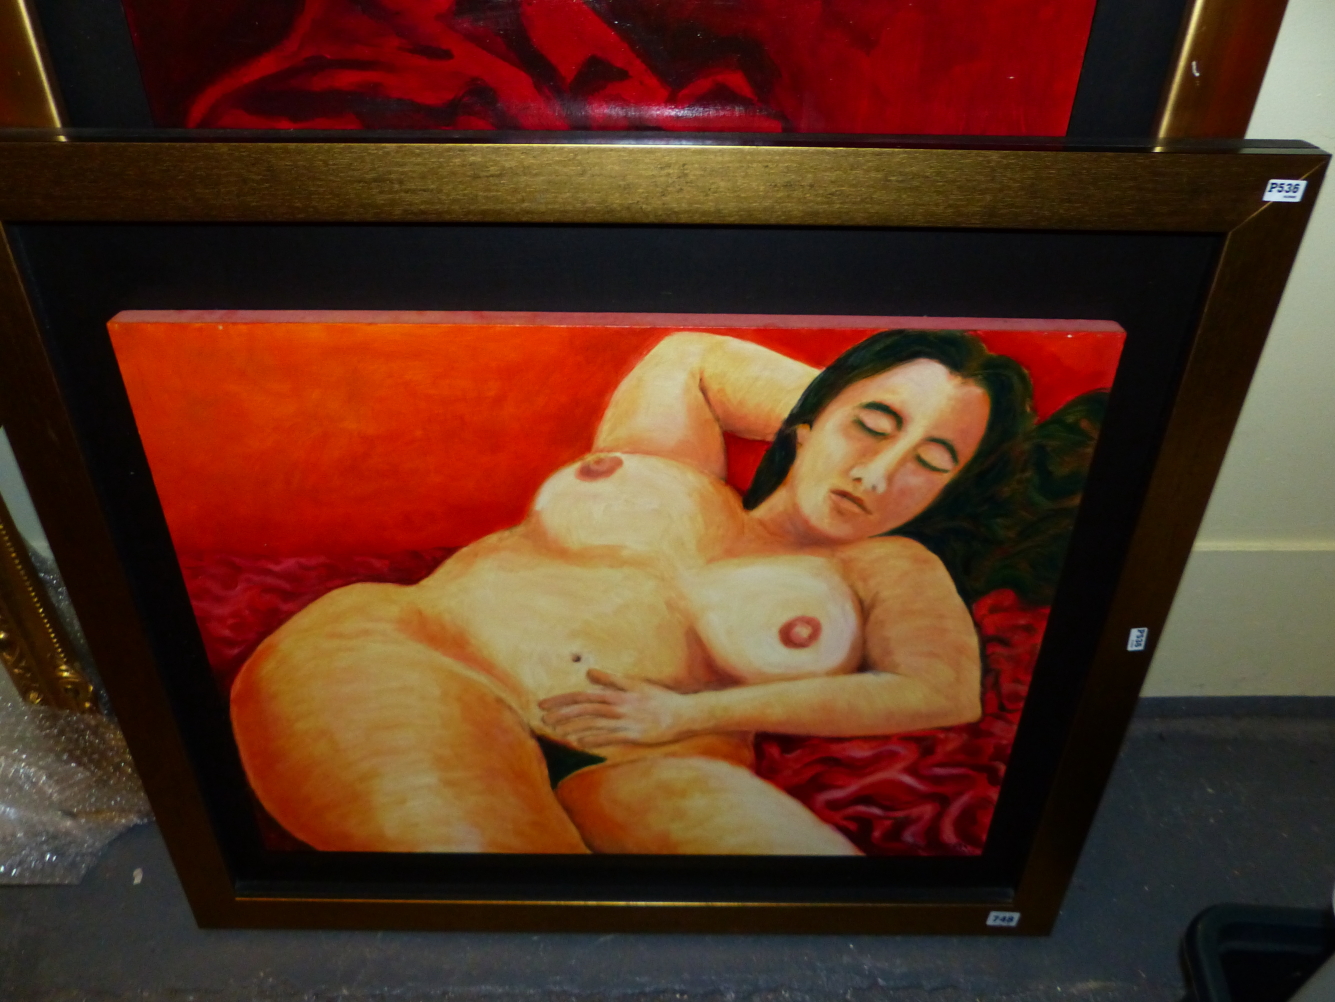 ISAACSON. 20th/21st.C. ARR. RECLINING NUDE, SIGNED AND DATED 2000, OIL ON BOARD. 55 x 71cms. - Image 12 of 12